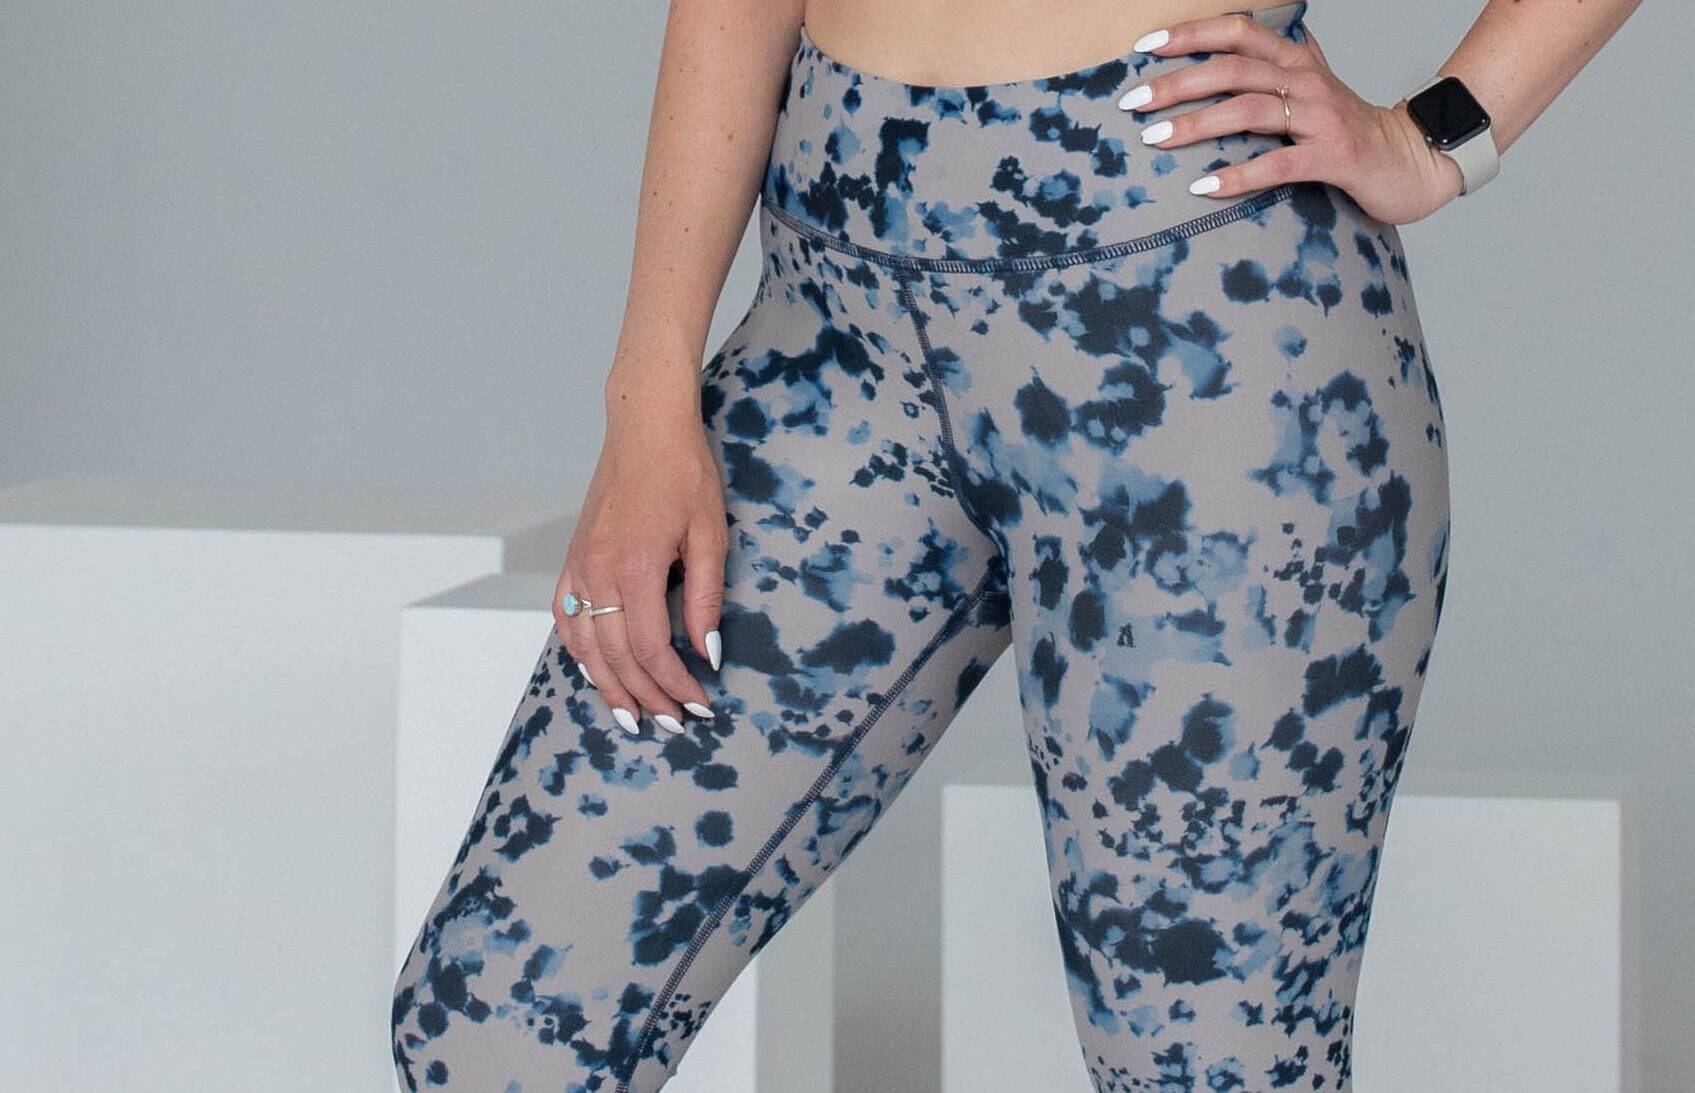 Women wearing a pair of blue spotted leggings with her hand on her hip.